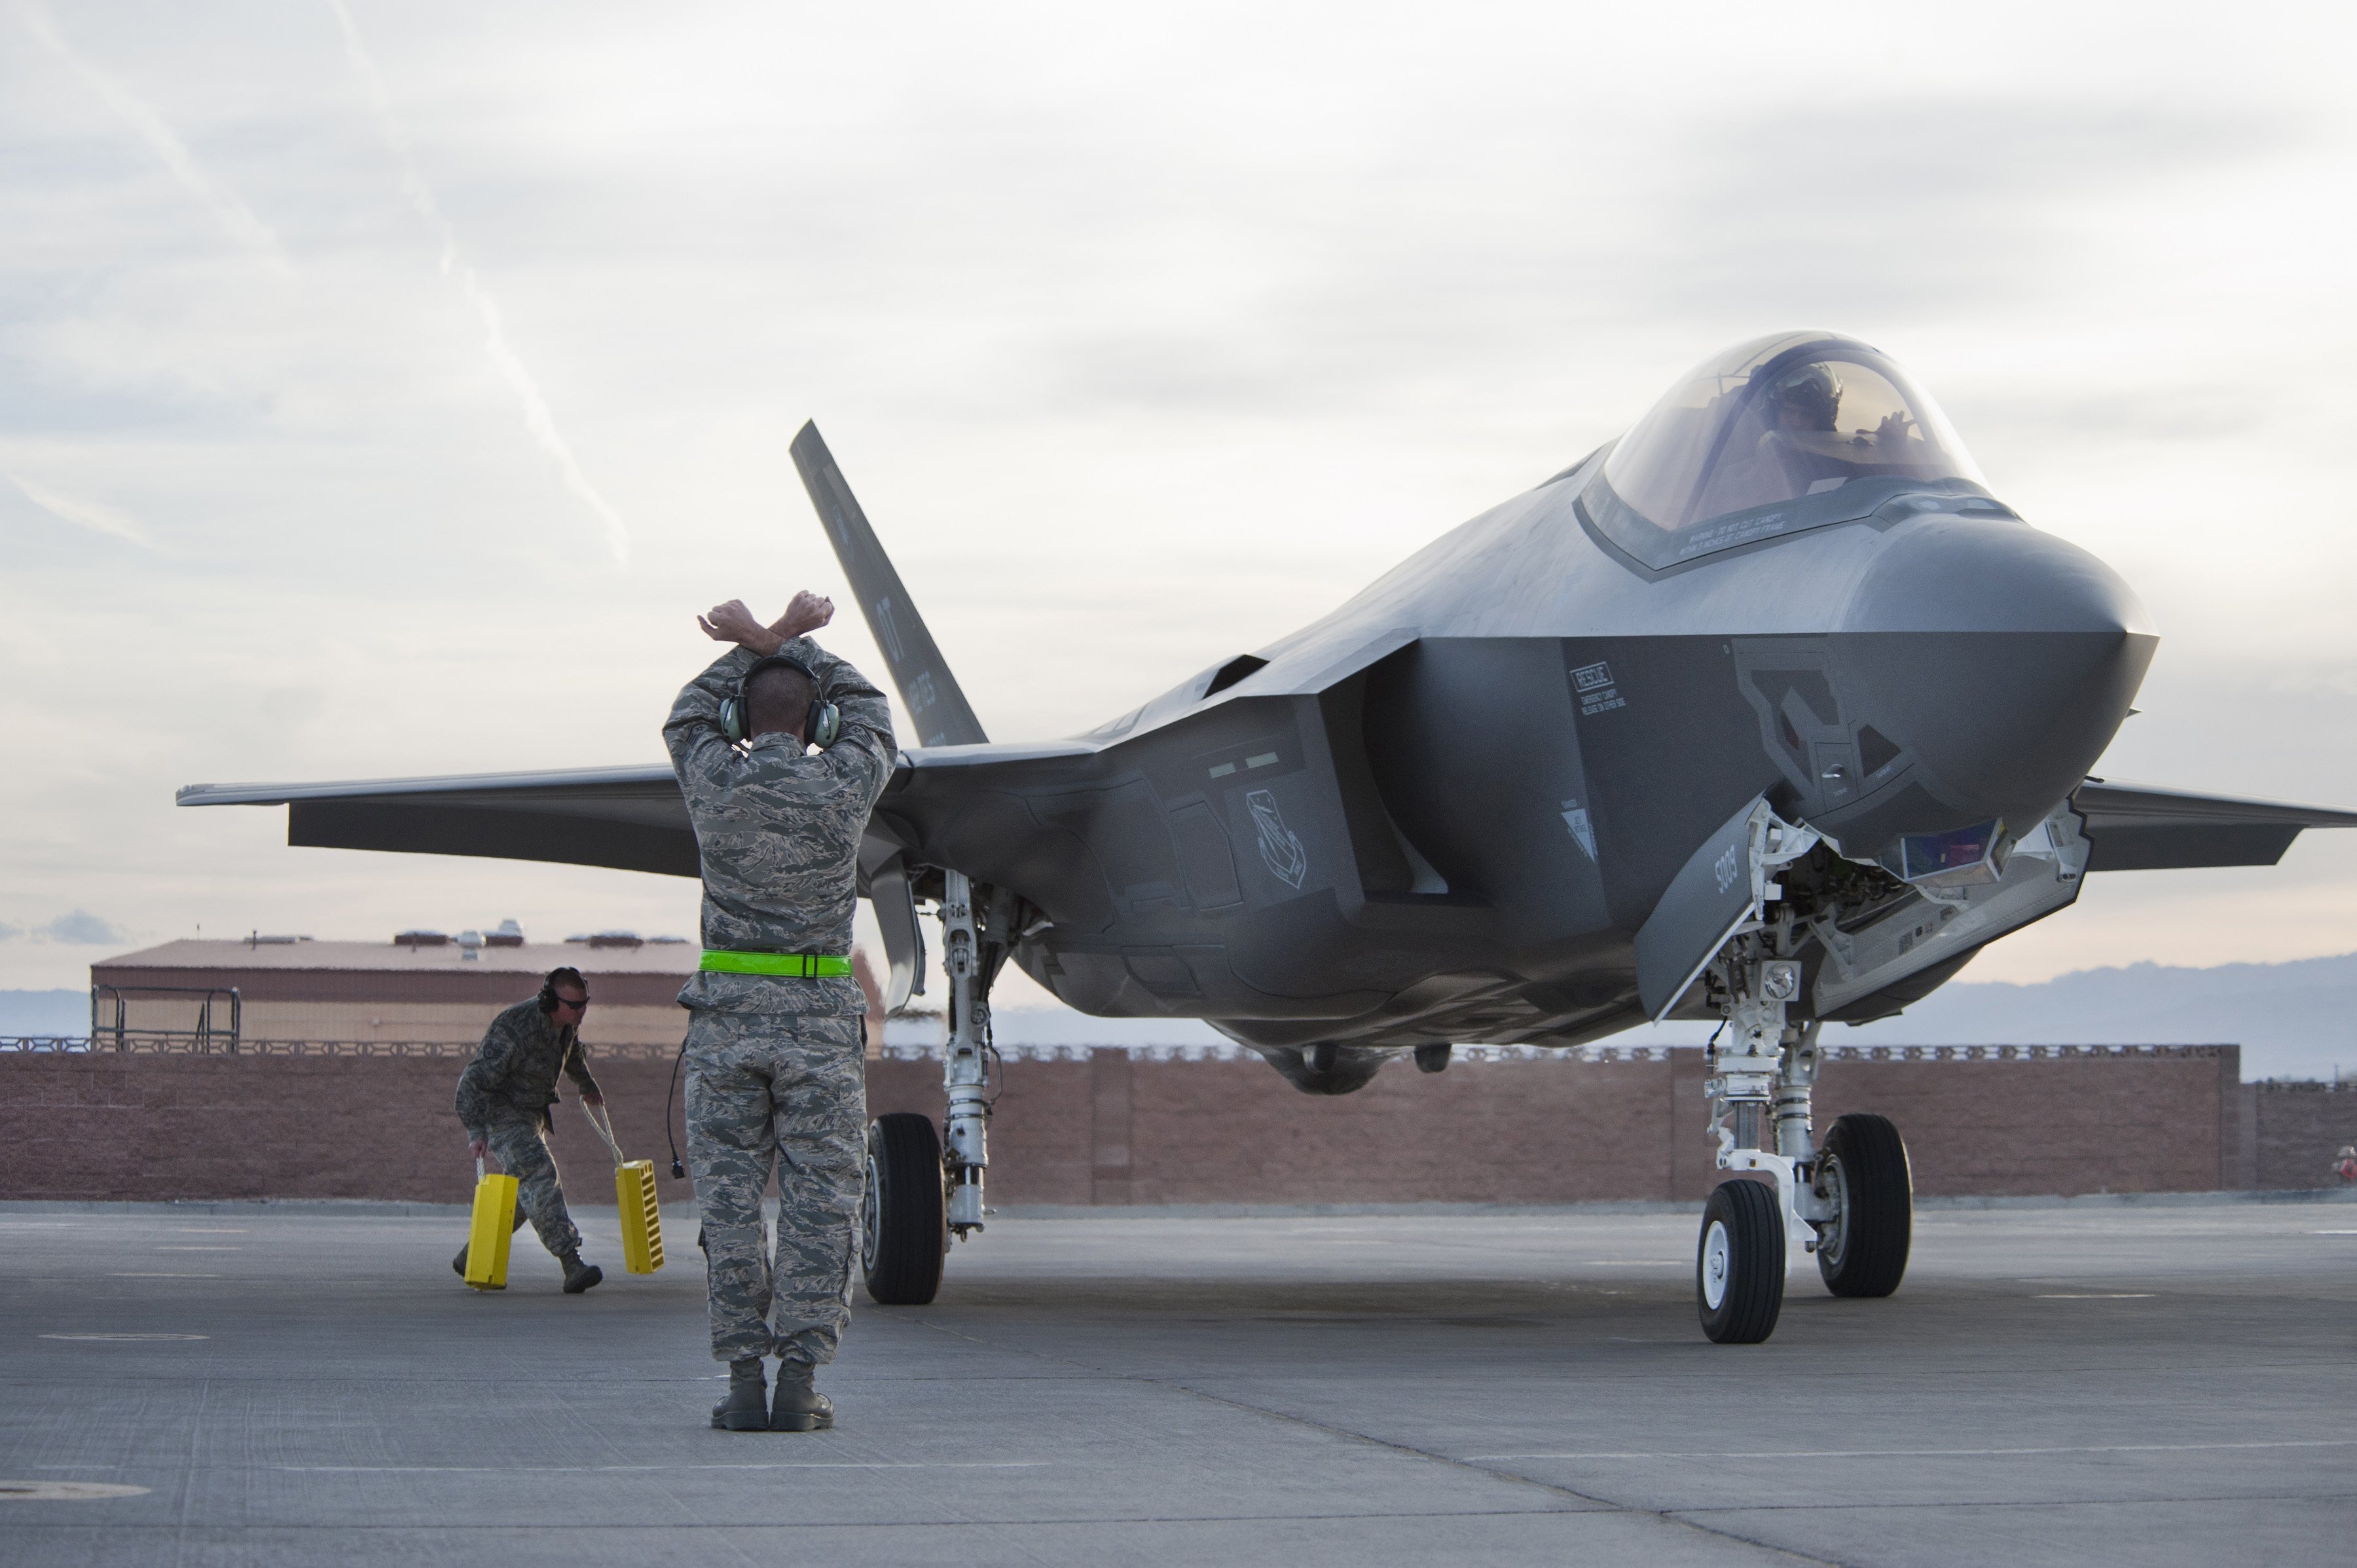 The world's five most powerful military vehicles, F-35_Lightning_II_at_Nellis_Air_Force_Base_6_Mar_2013 via Simple Wikipedia.